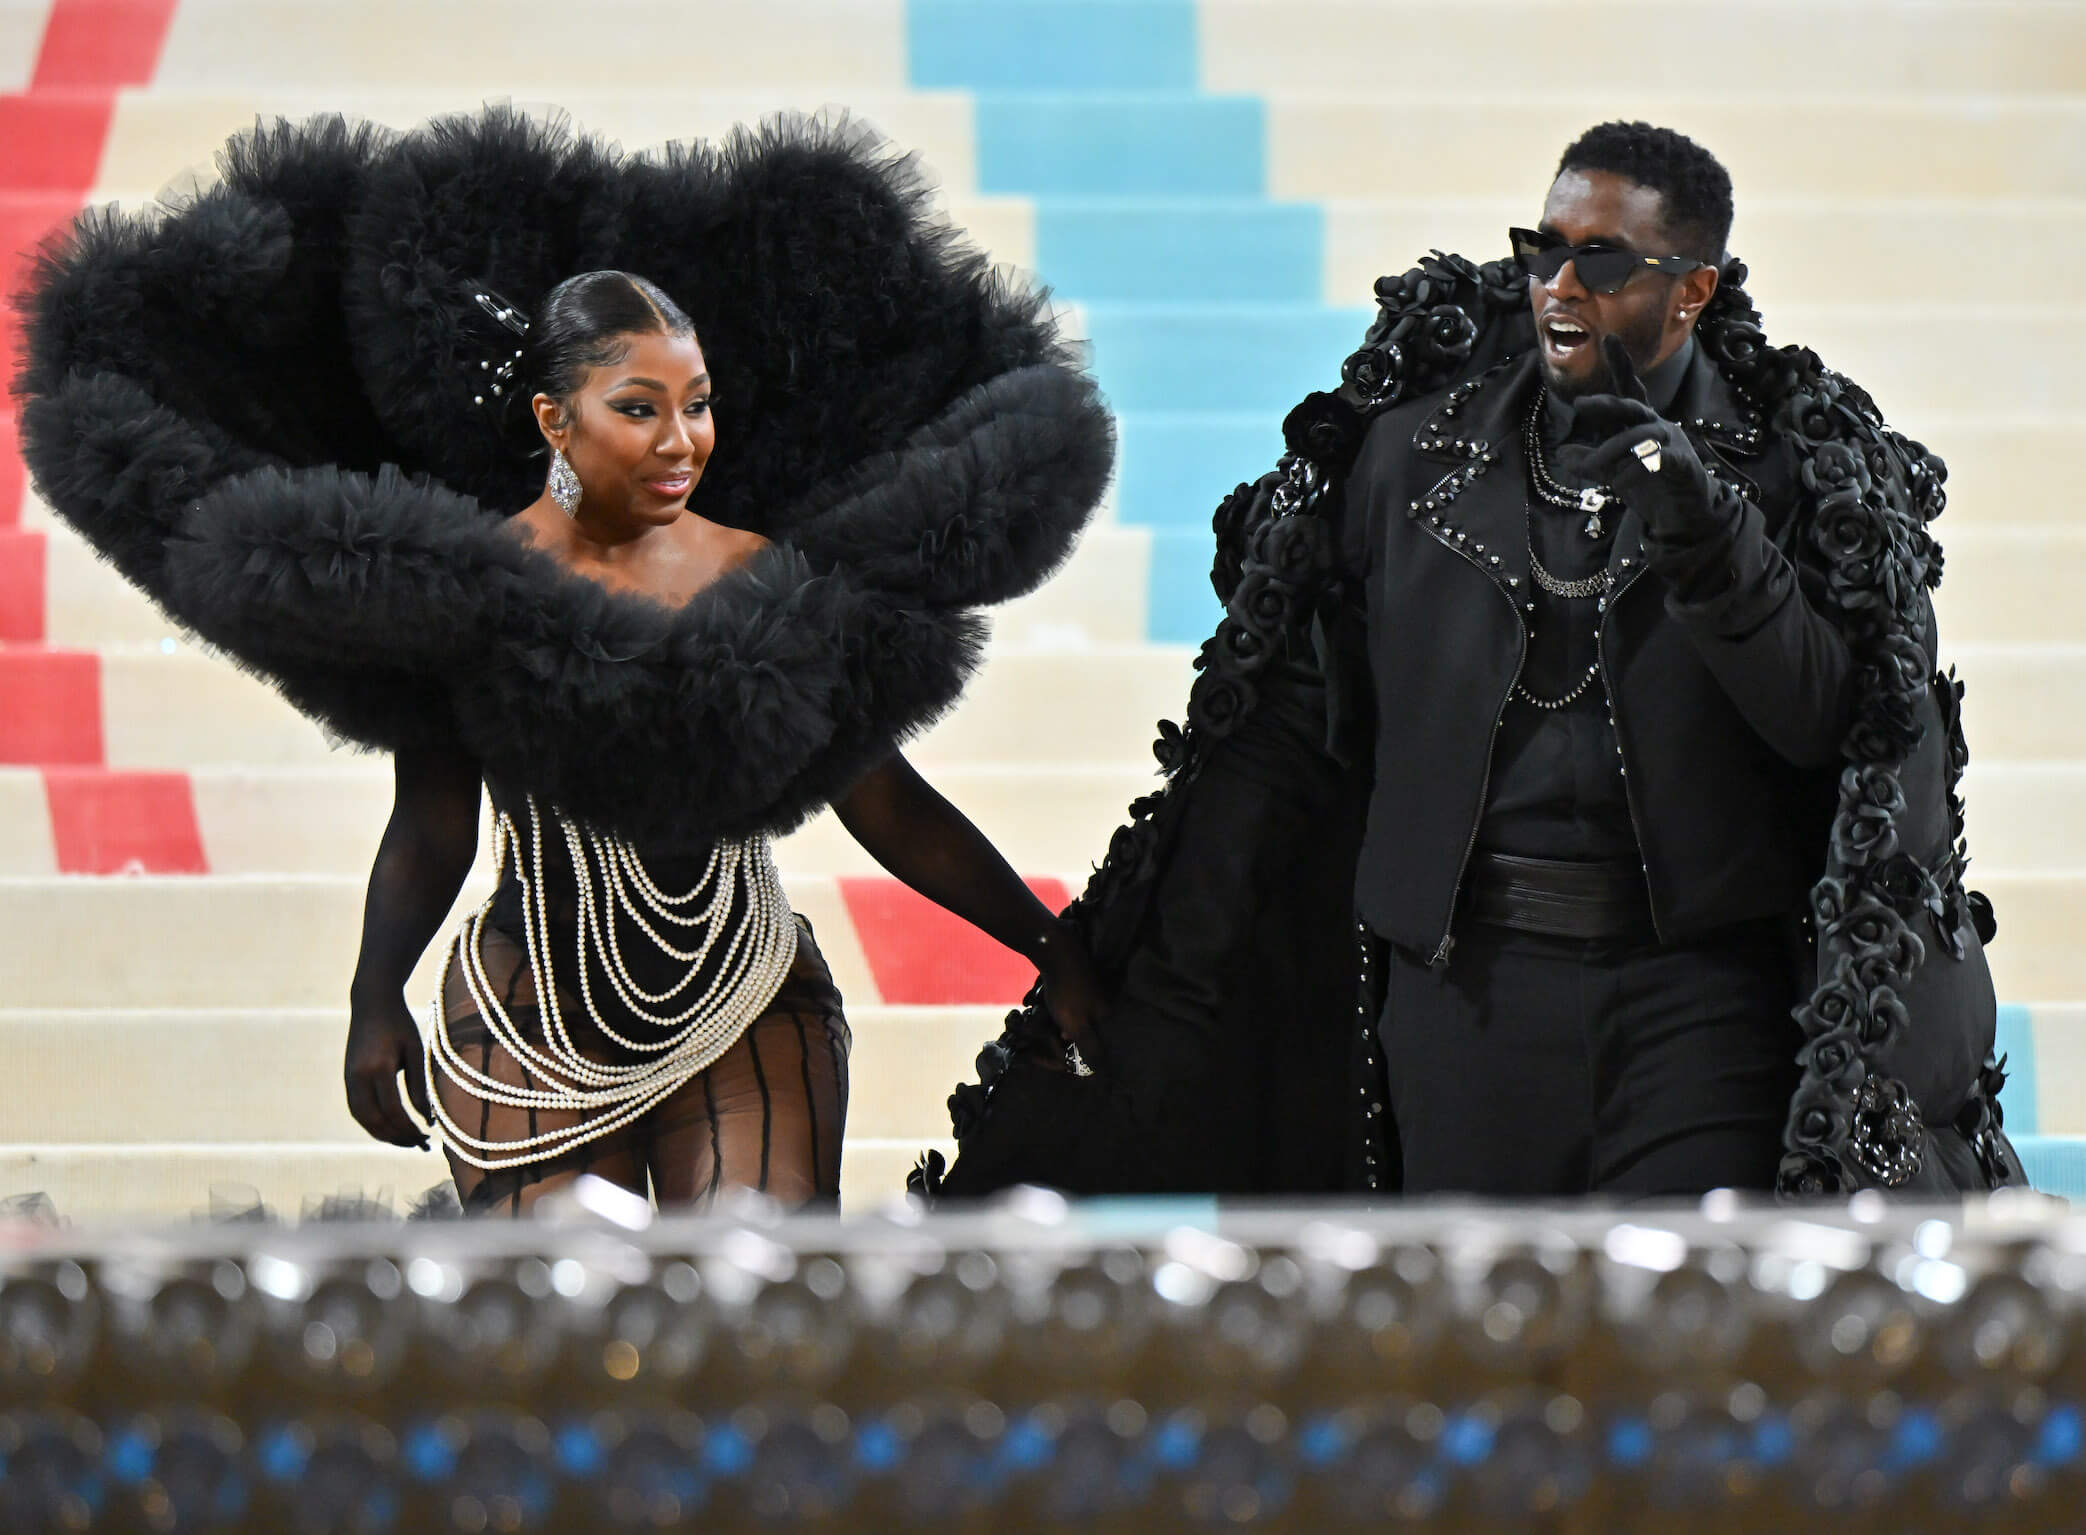 Yung Miami and Sean 'P. Diddy' Combs walking hand-in-hand into the 2023 Met Gala